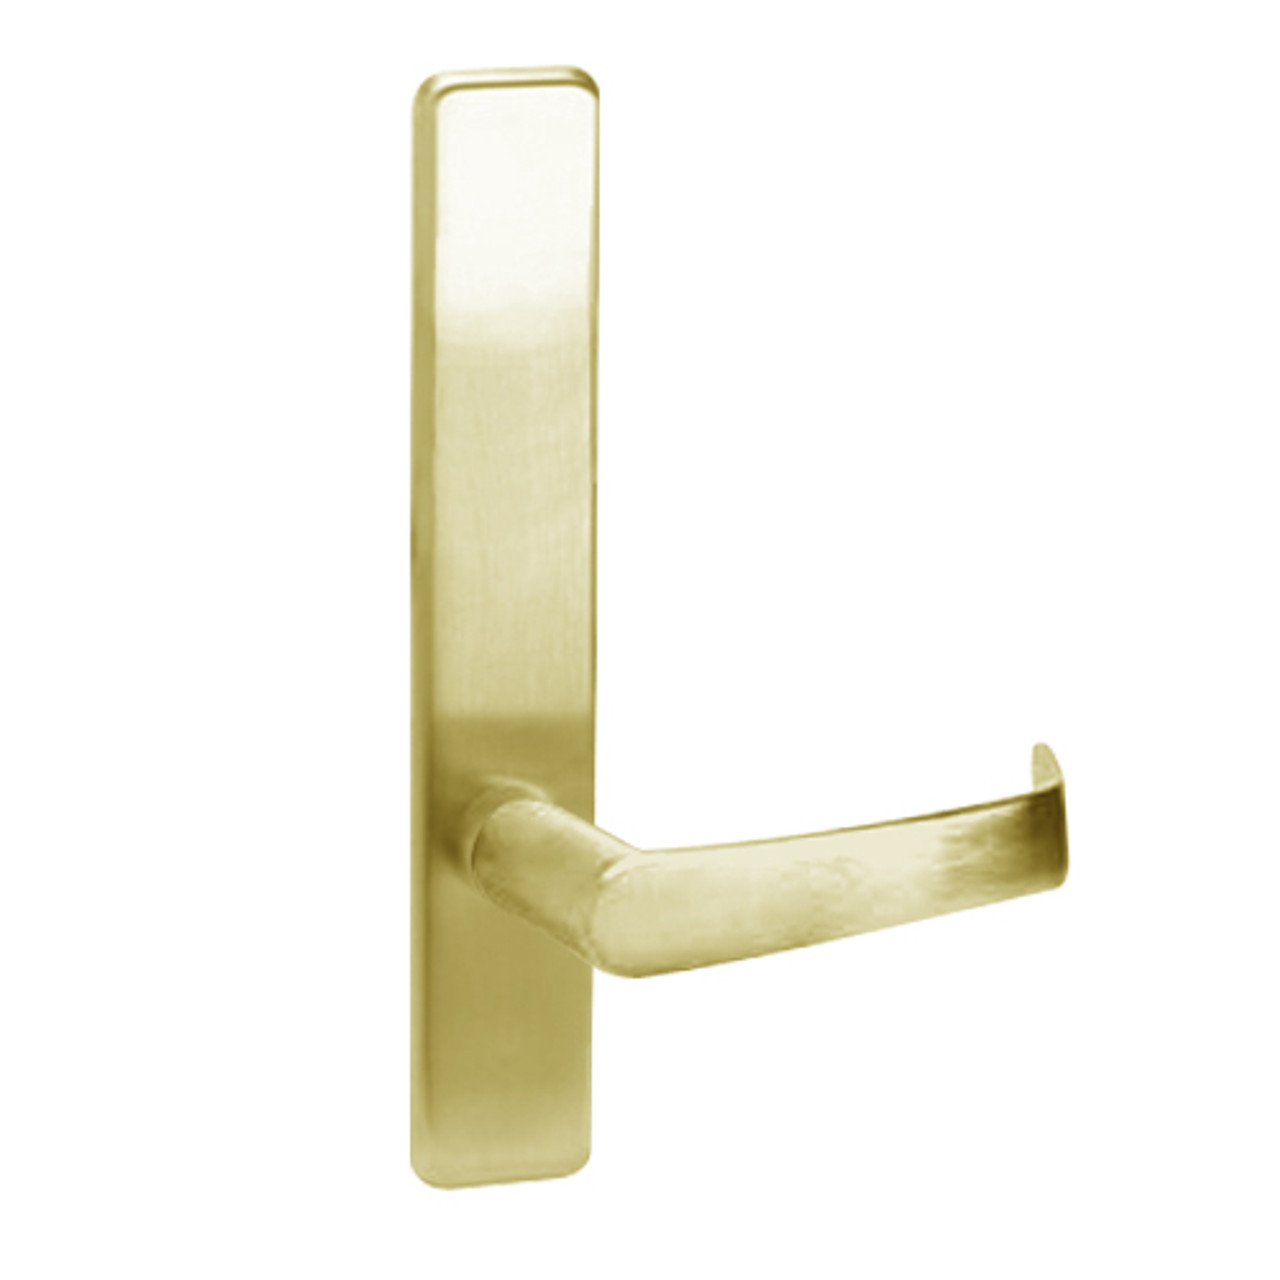 N850-606-LHR Corbin ED4000 Series Exit Device Trim with Dummy Newport Lever in Satin Brass Finish